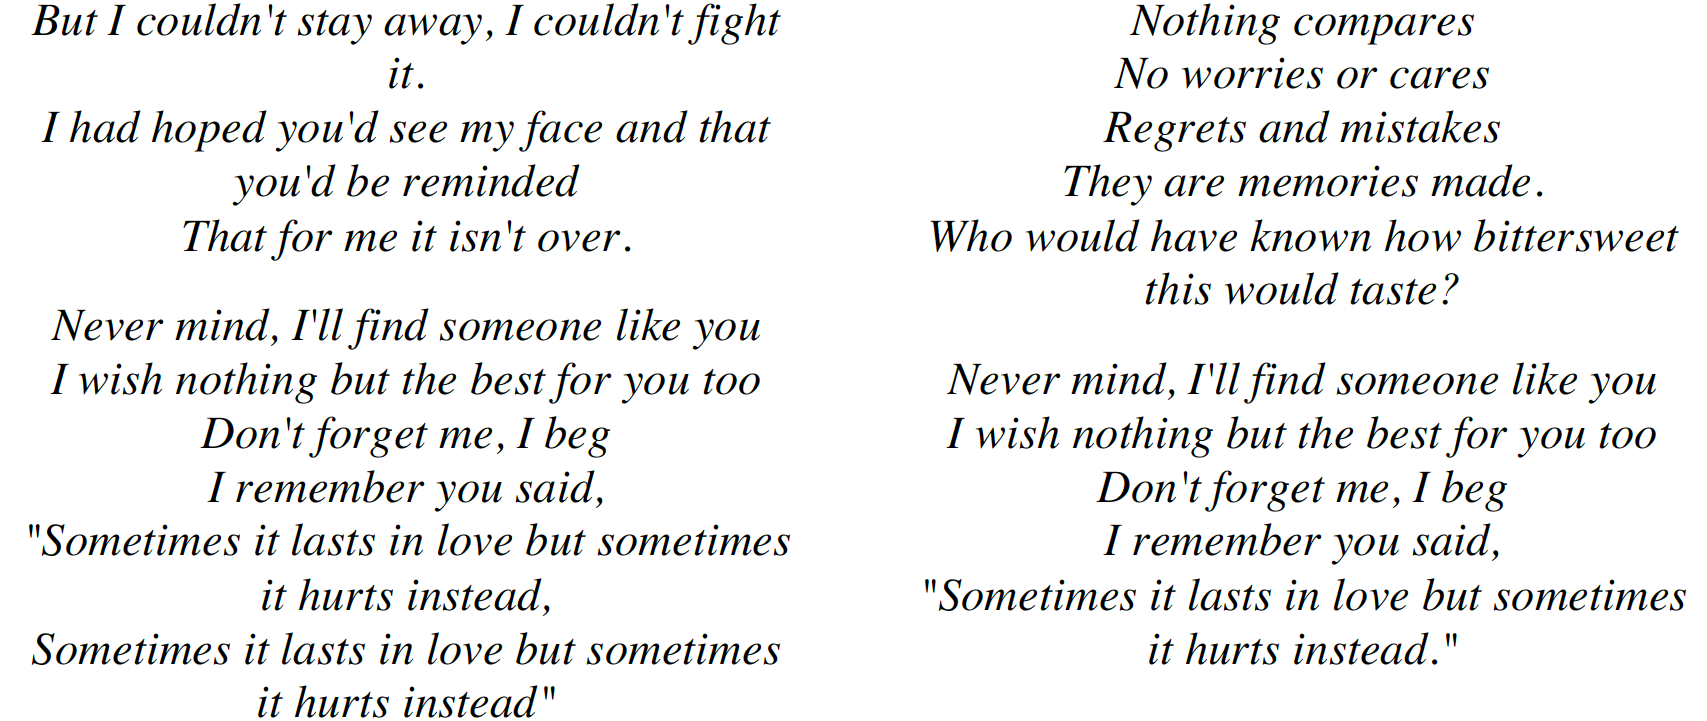 Someone Like You  Song lyric quotes, Regrets and mistakes, Song quotes